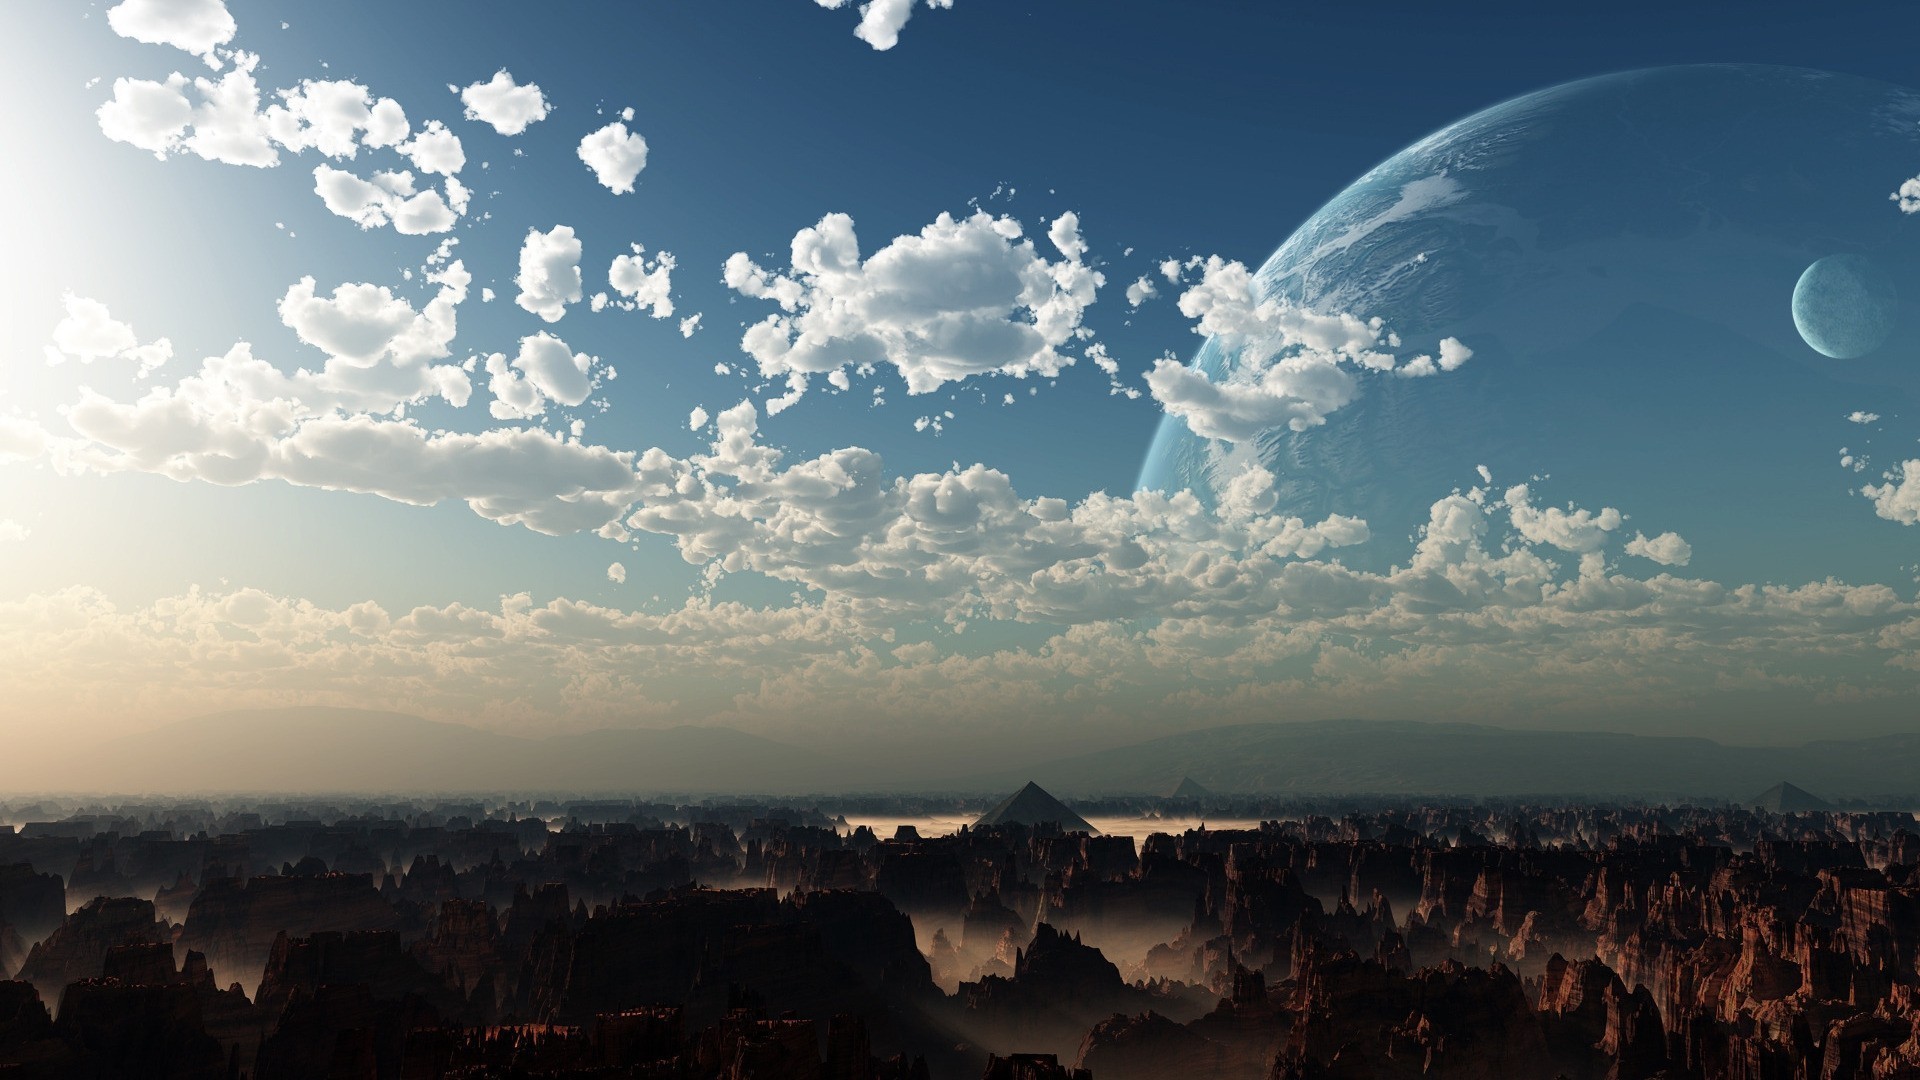 1920x1080 General  clouds digital art planet Moon landscape rock formation  sunlight pyramid sky high view canyon